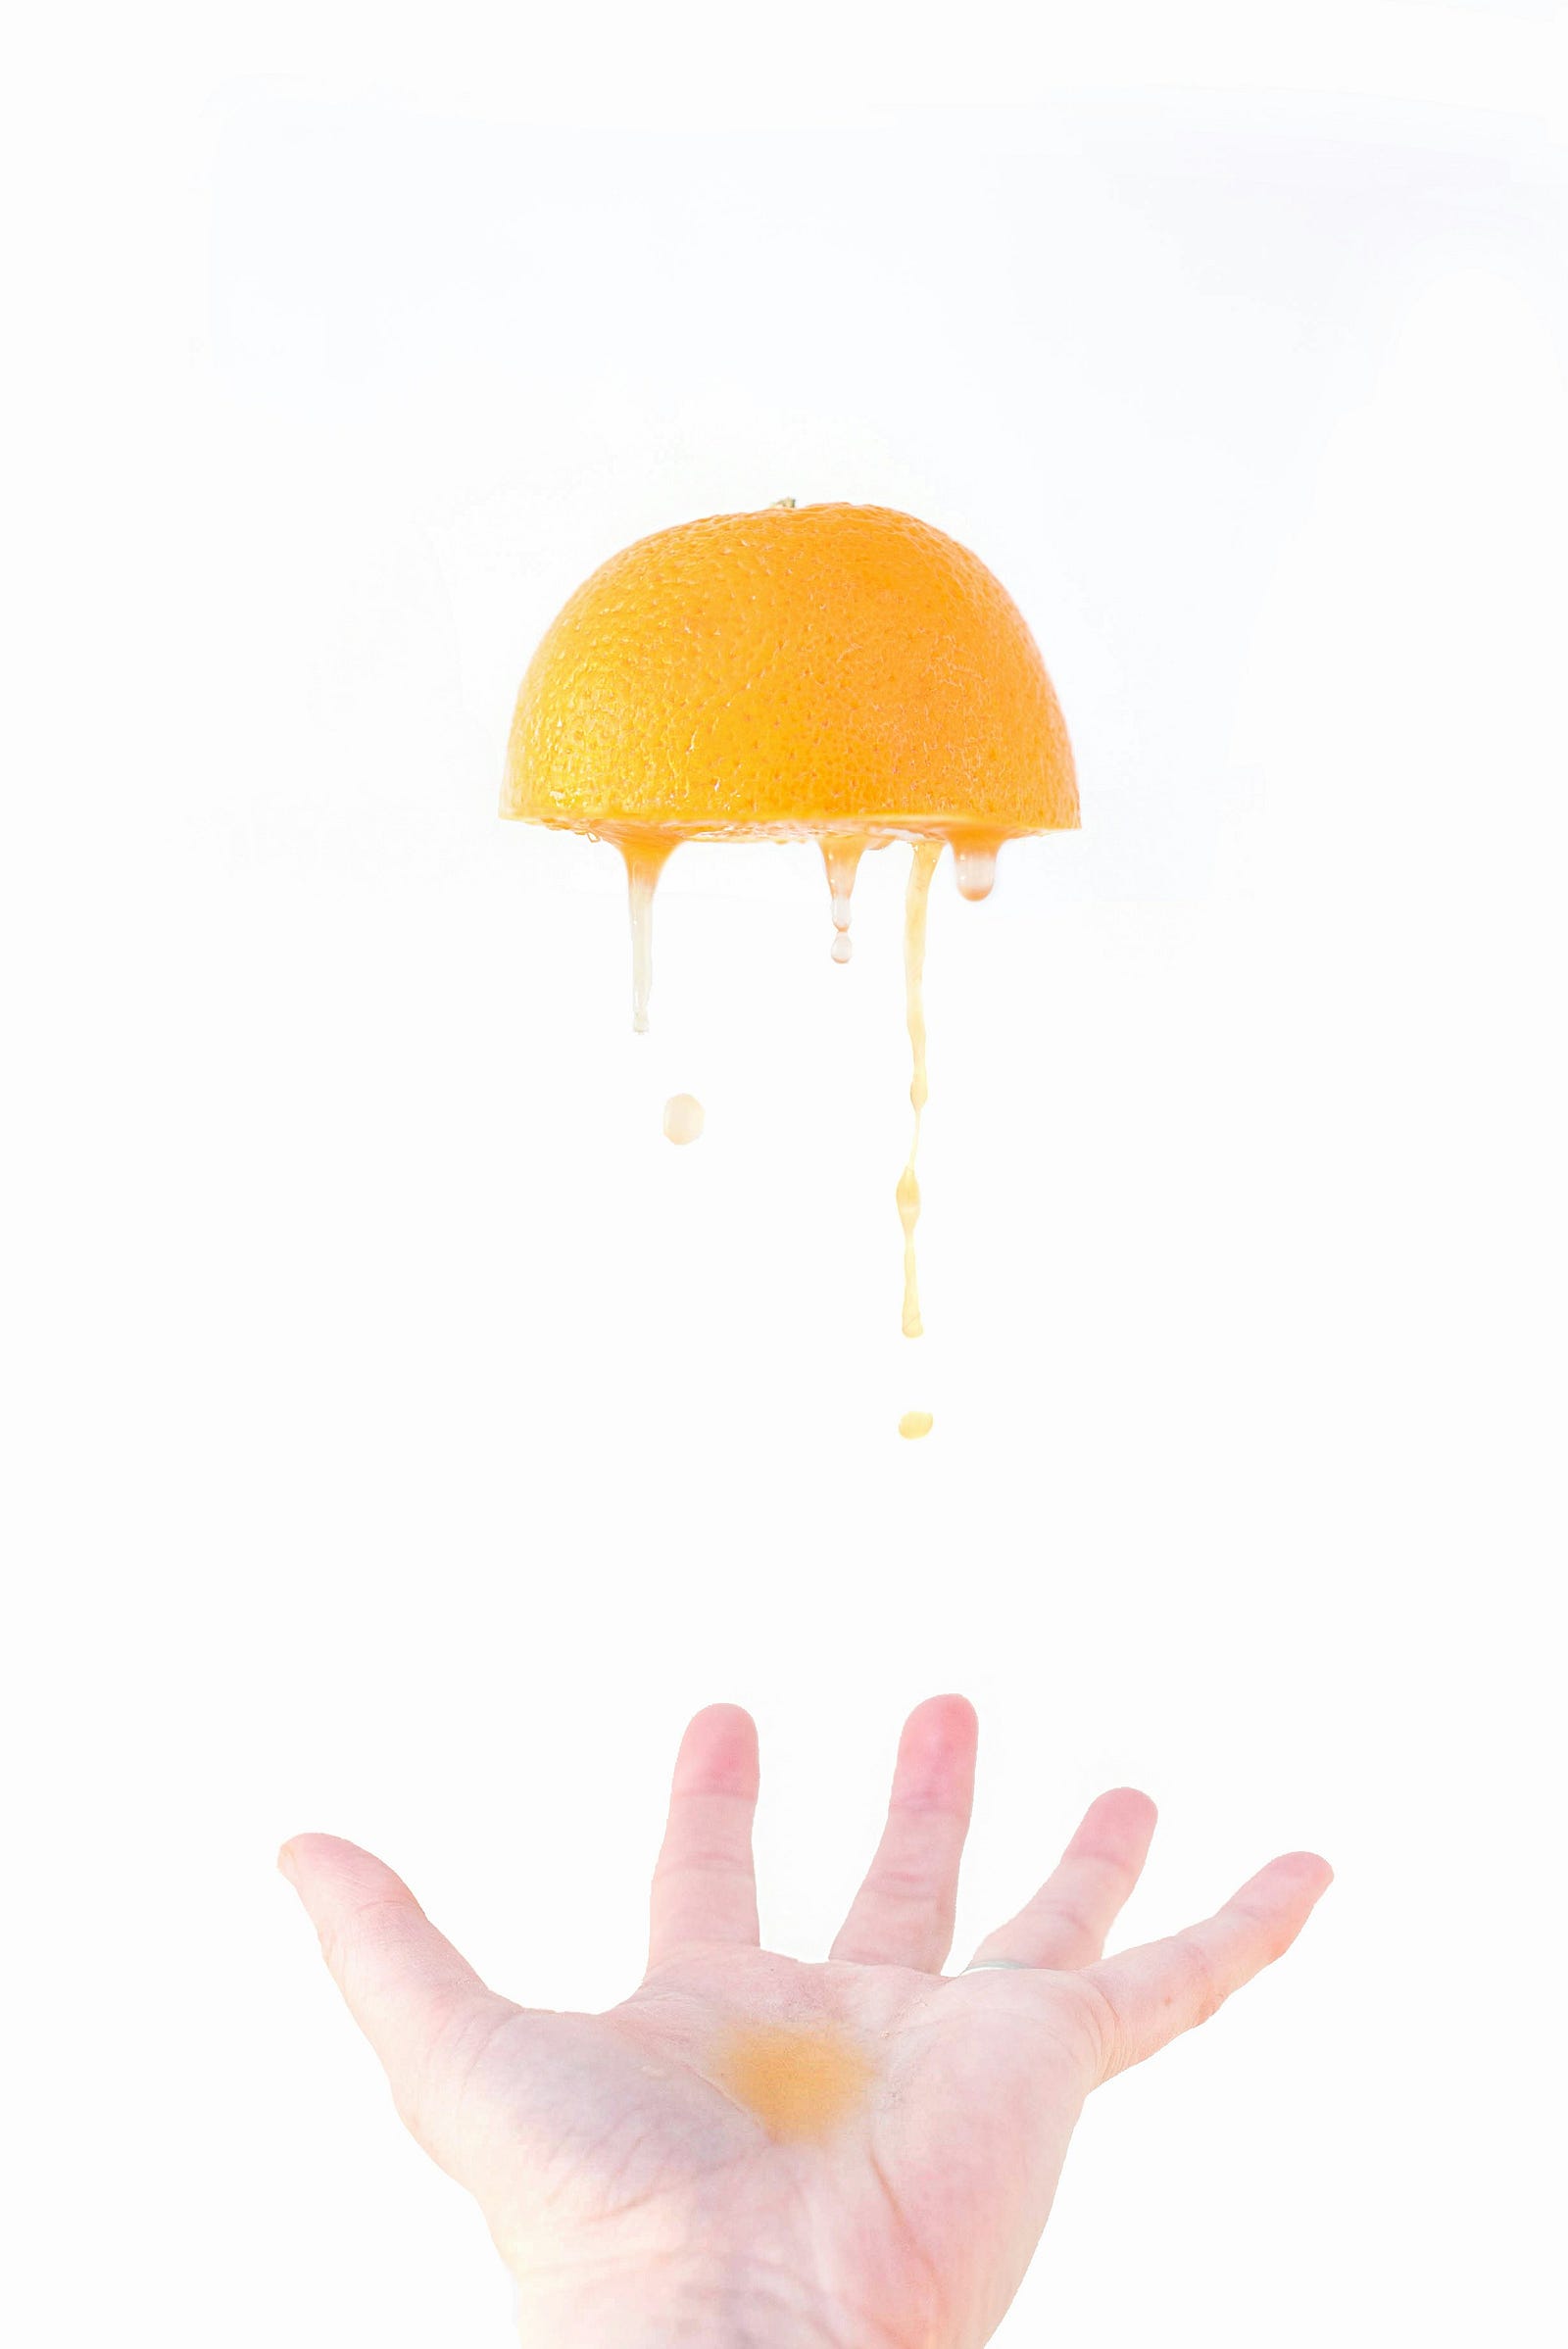 A hand throws a half orange up, with juice spilling from the bottom of the fruit.